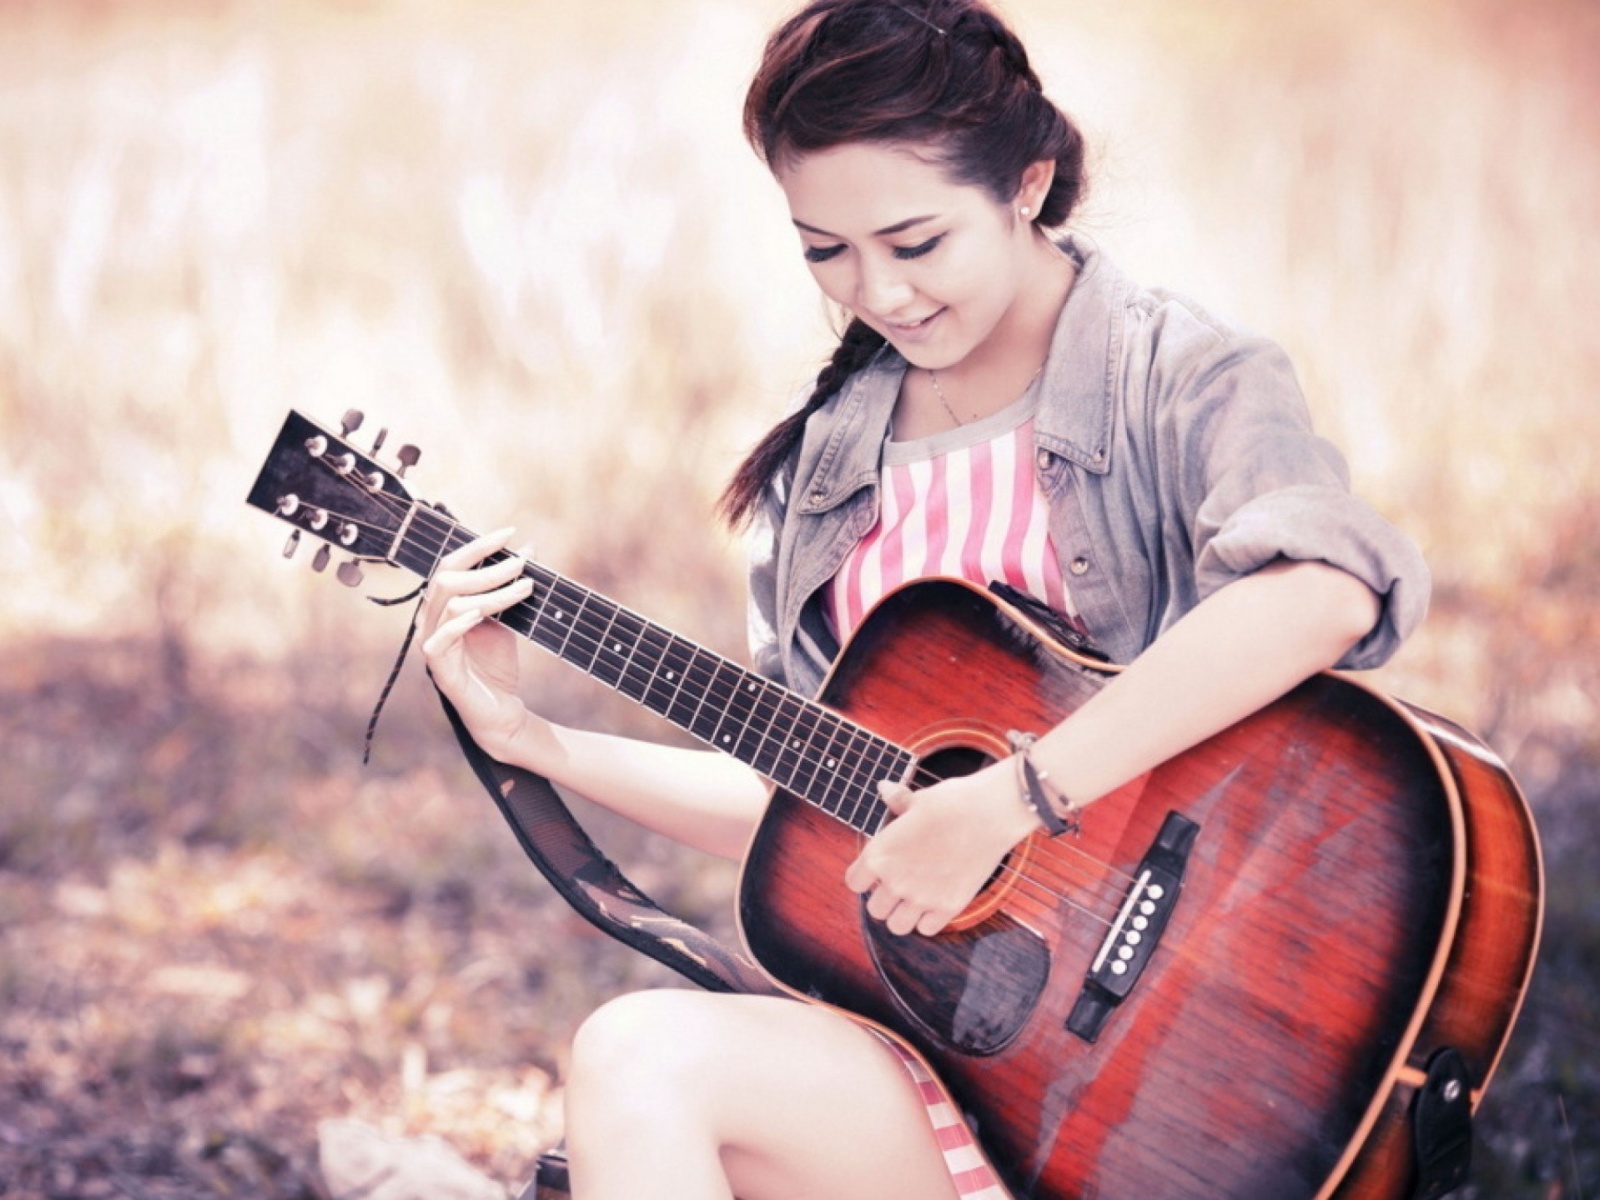 Das Chinese girl with guitar Wallpaper 1600x1200